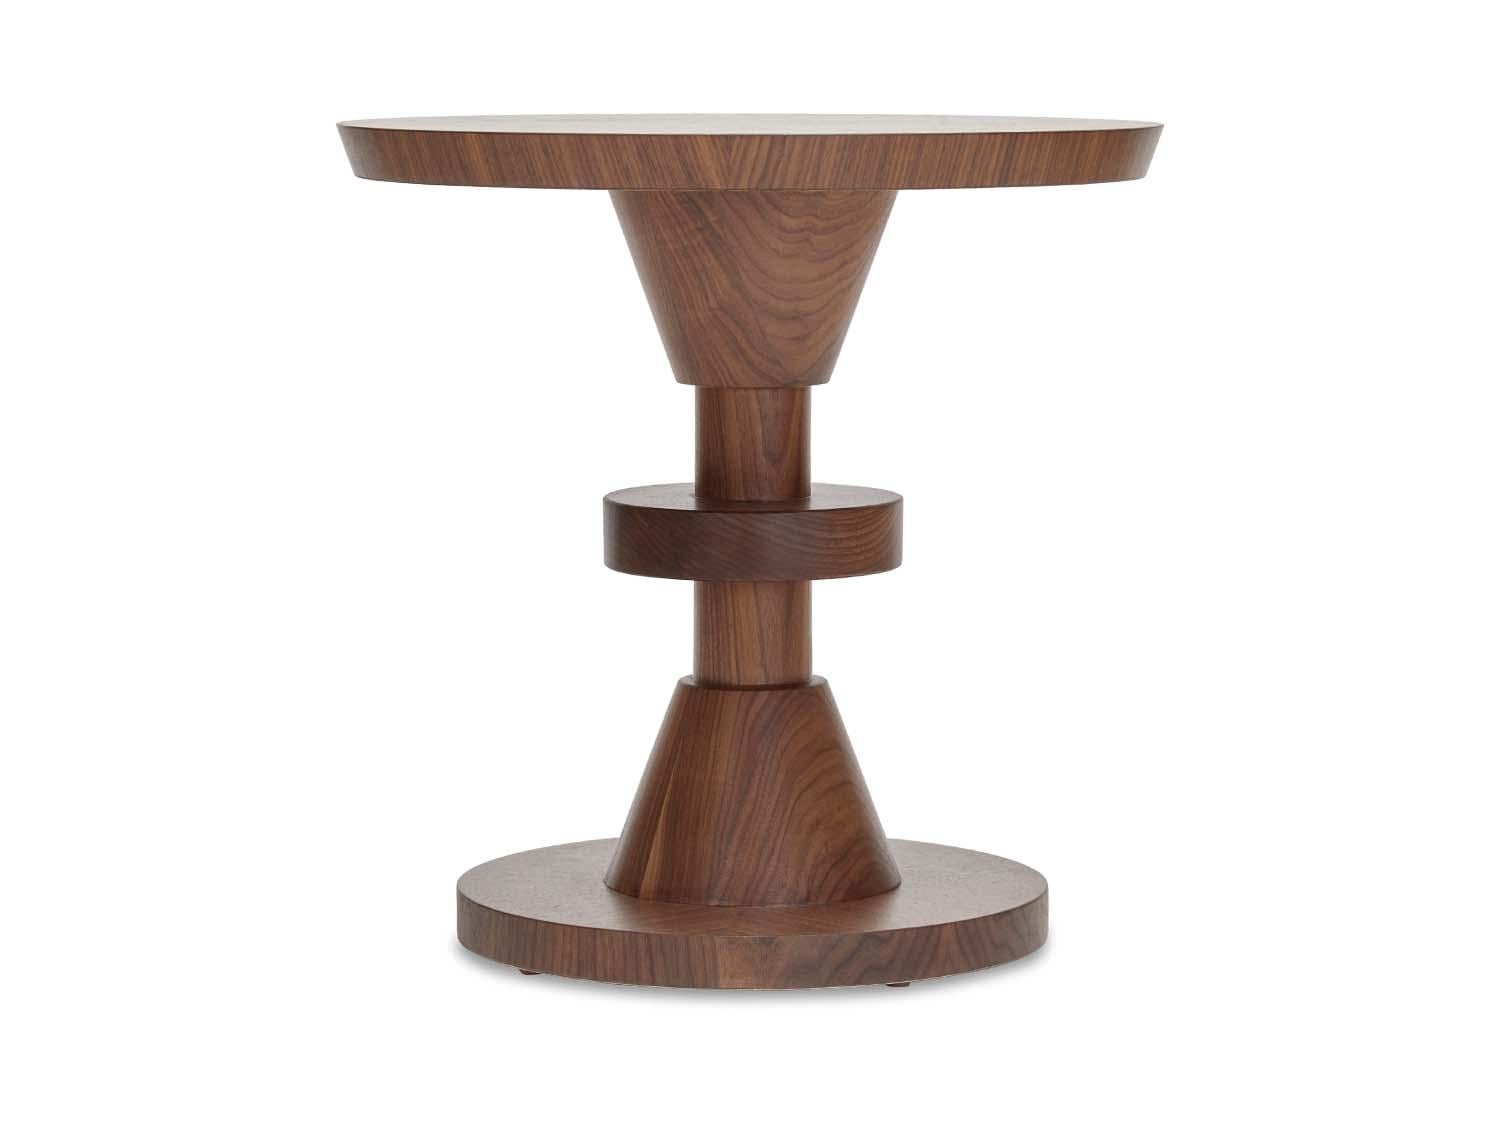 The Capitola table features a series of geometric shapes stacked on top of each other with solid wood details. Available in American walnut or white oak. 

The Lawson-Fenning Collection is designed and handmade in Los Angeles, California. Reach out